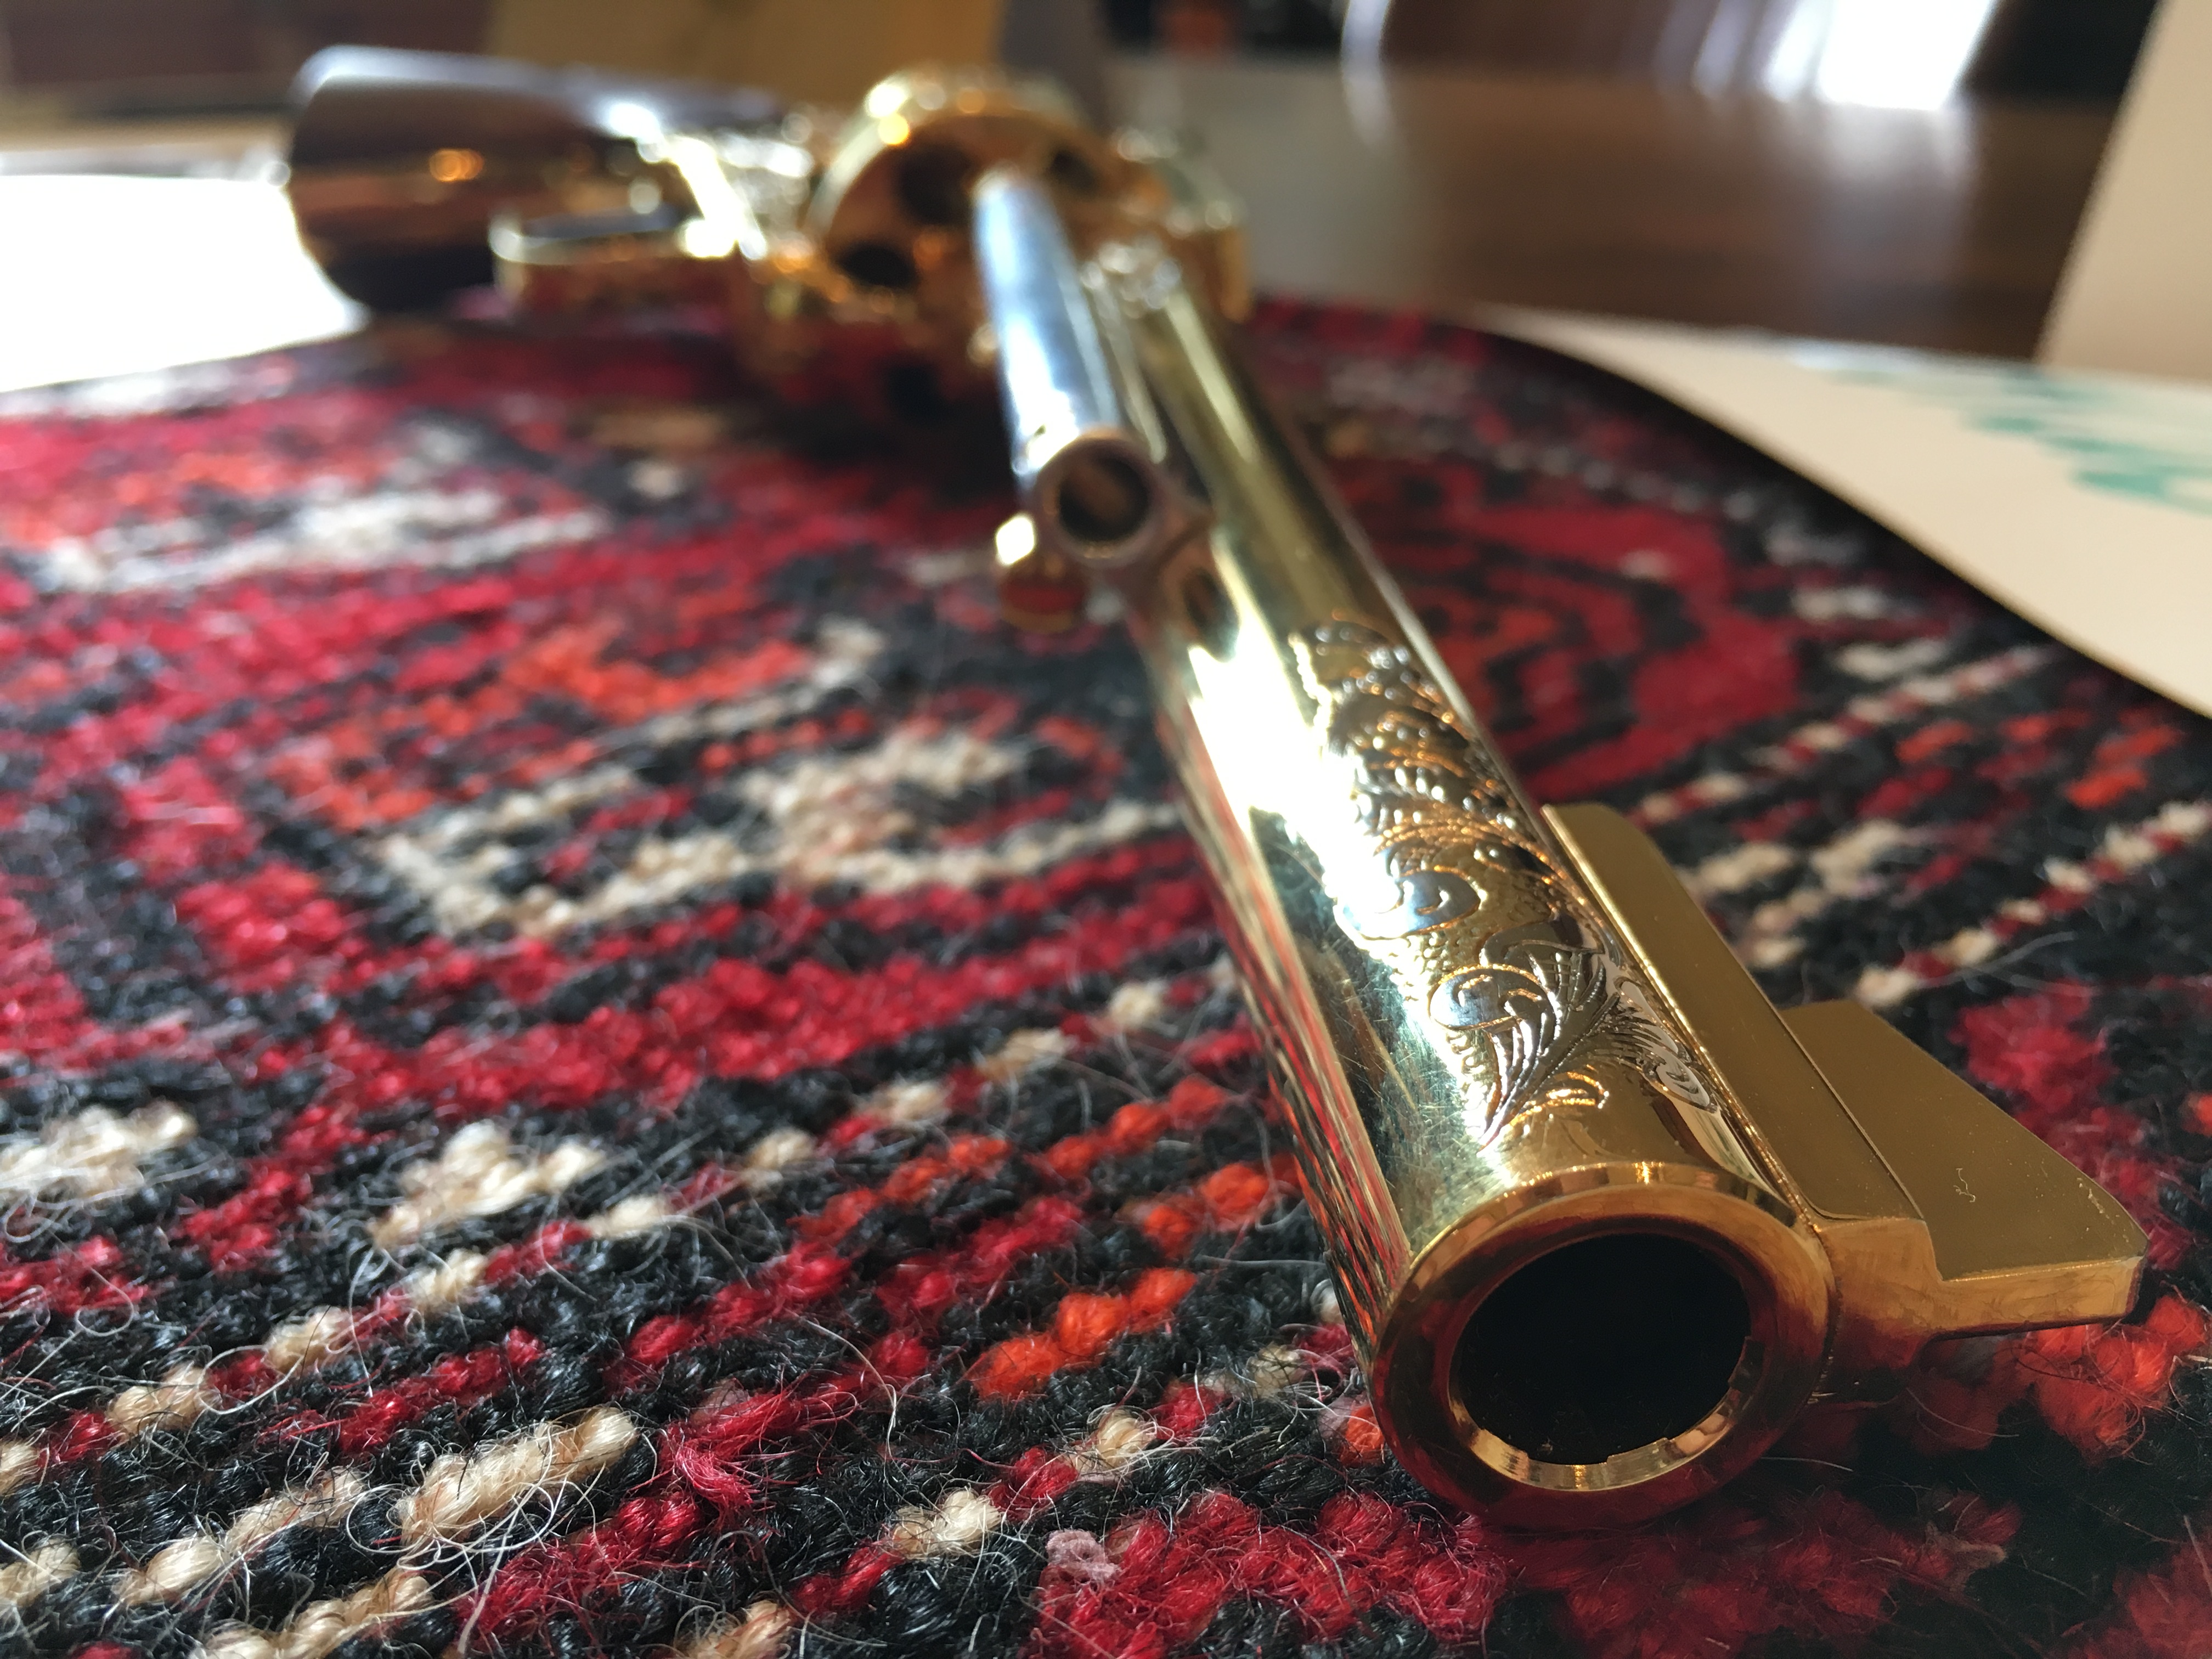 The stolen gold-plated .44 Magnum is now back where it belongs.